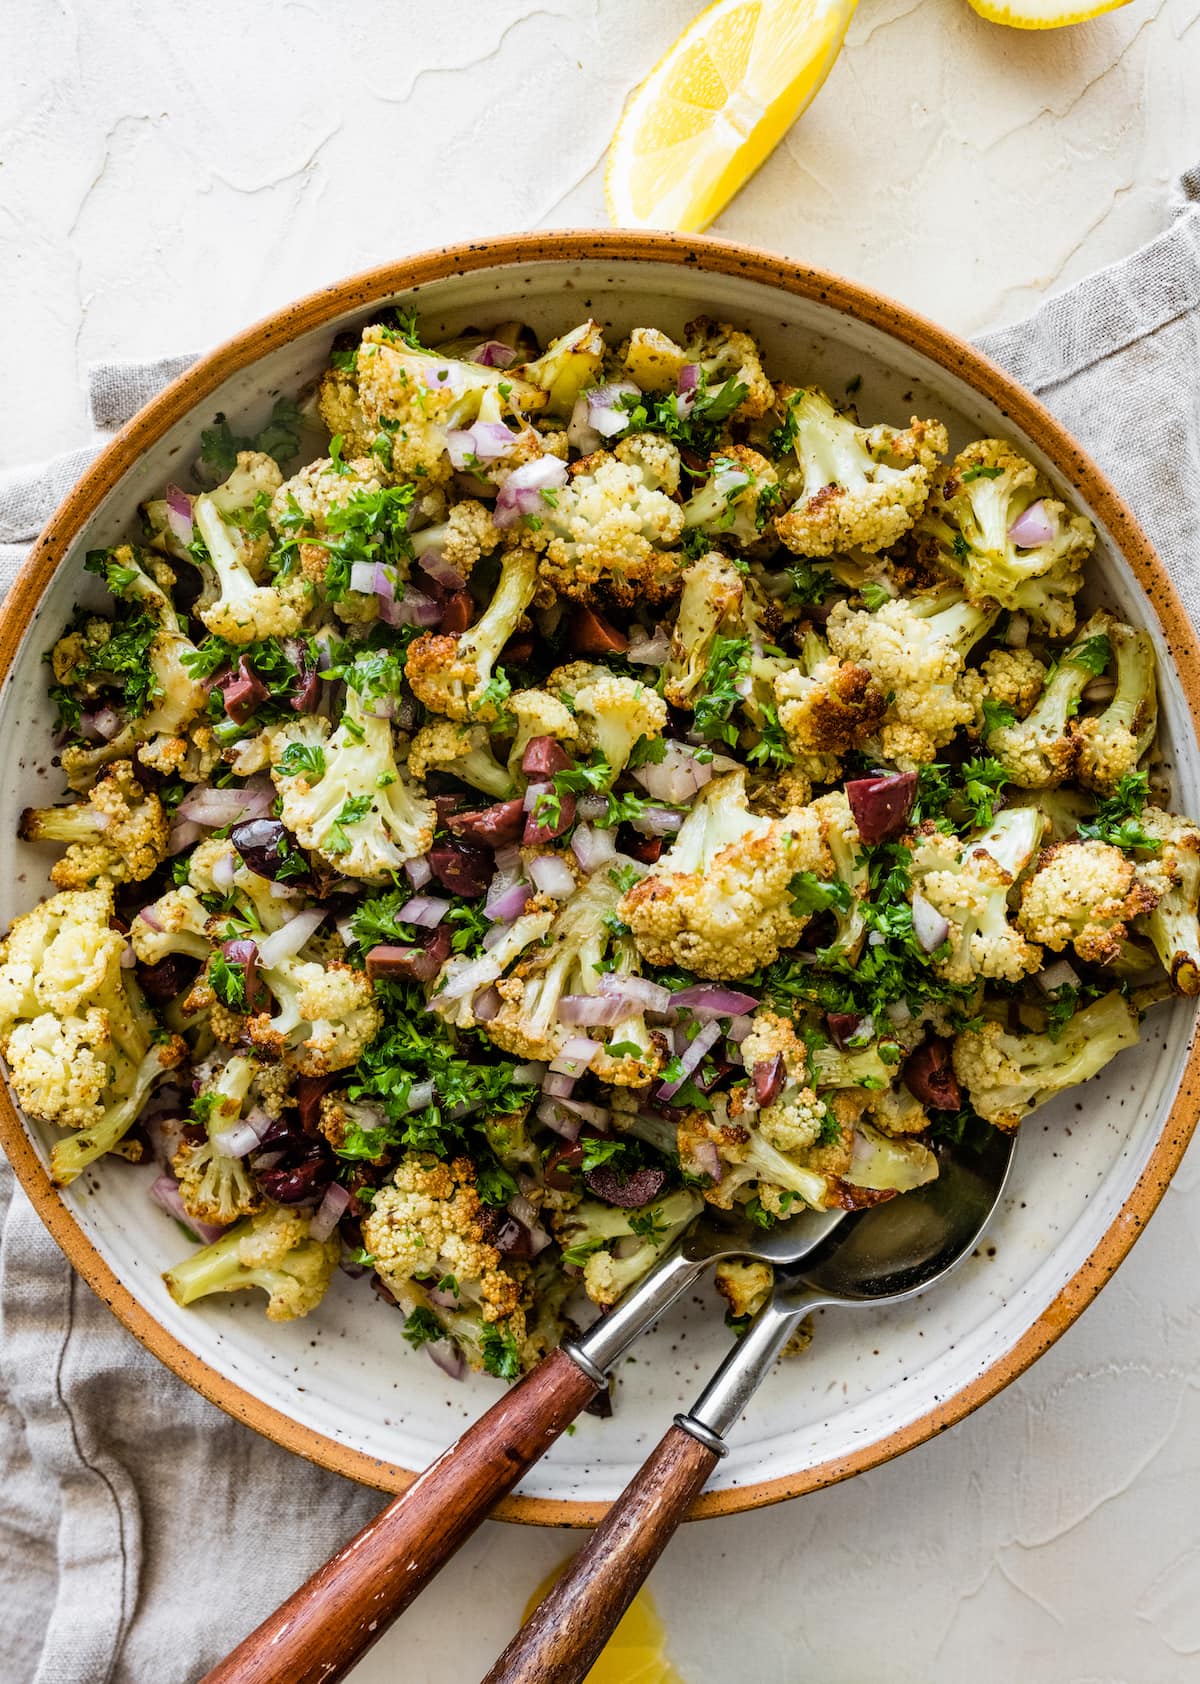 Roasted cauliflower salad in a large bowl with serving spoons.